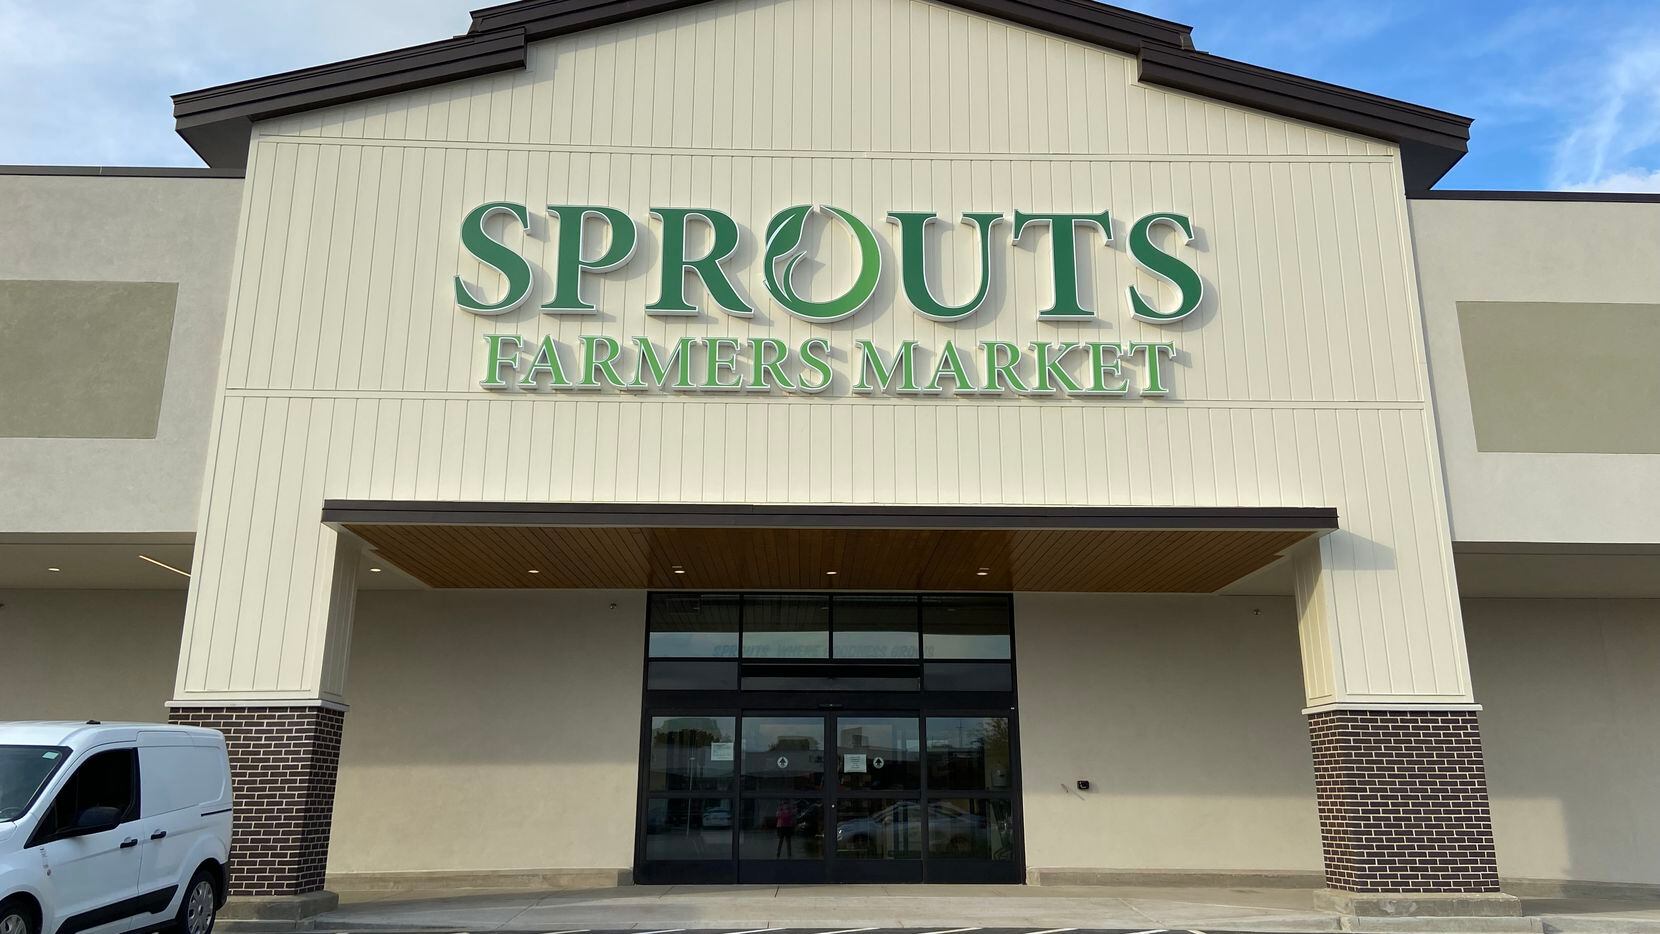 Sprouts Farmers Market near Lakewood is the newest in grocer’s Dallas plans